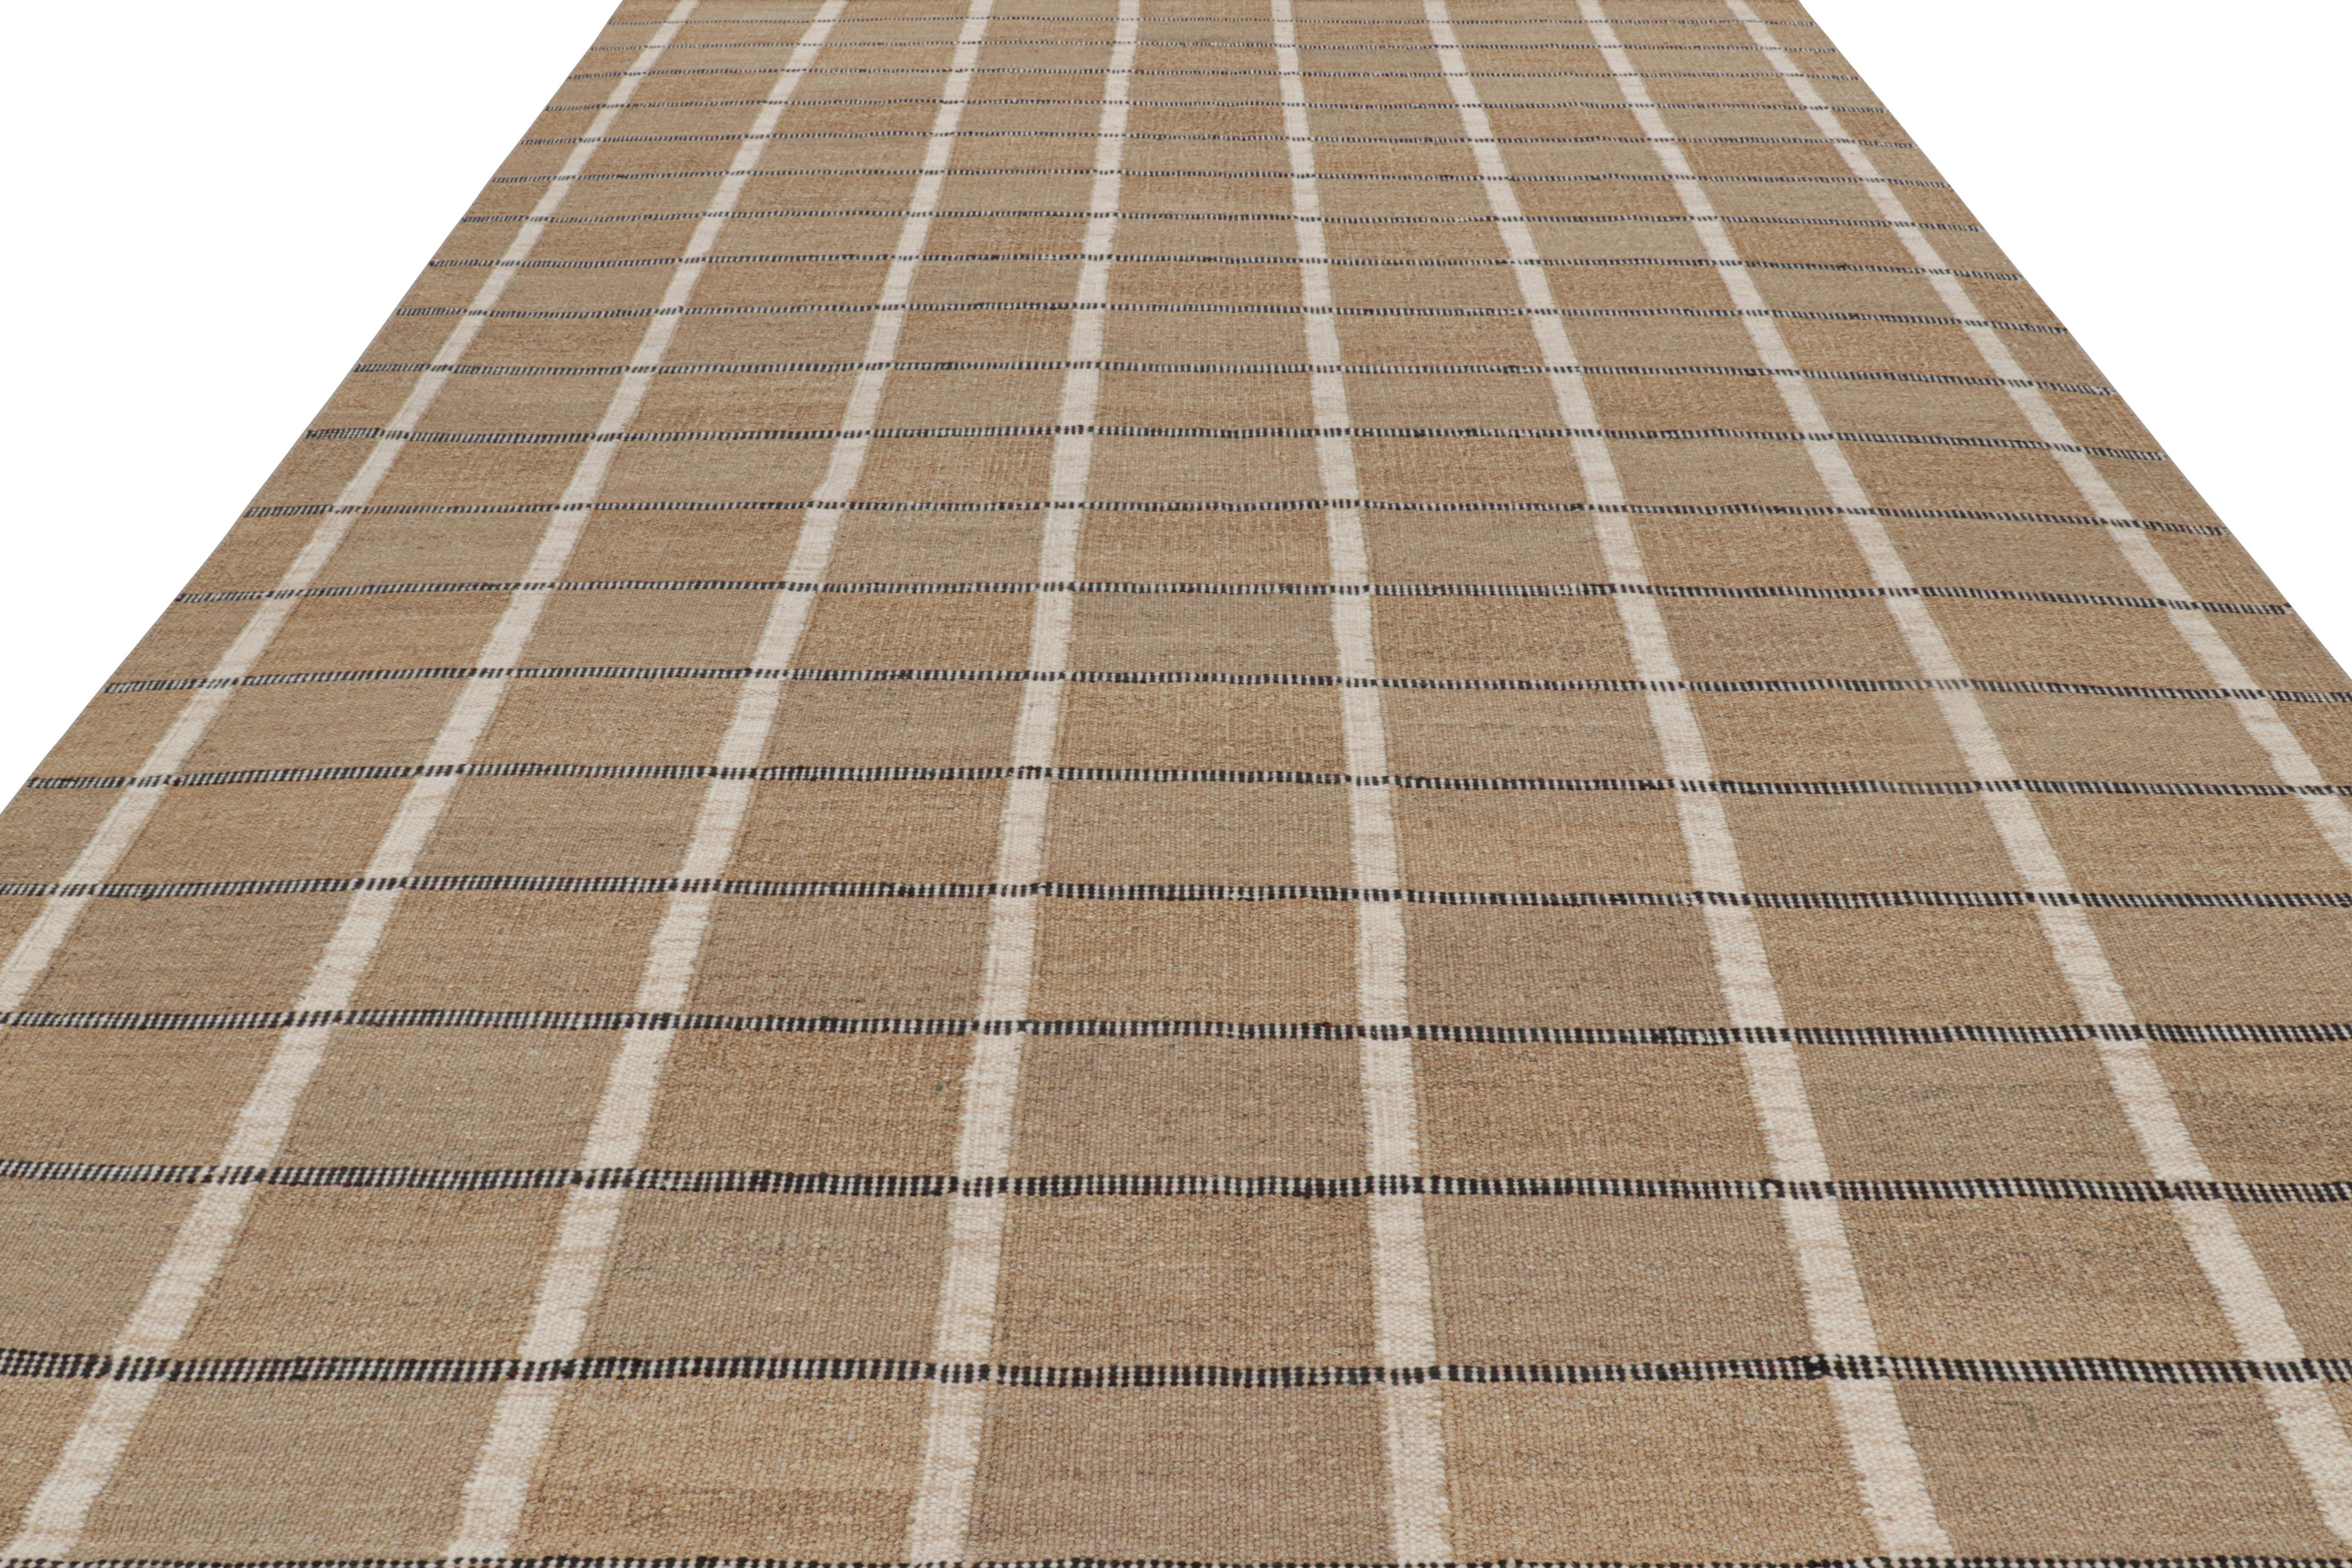 Hand-Woven Rug & Kilim’s Scandinavian Style Rug in Beige-Brown with White and Blue Stripes For Sale